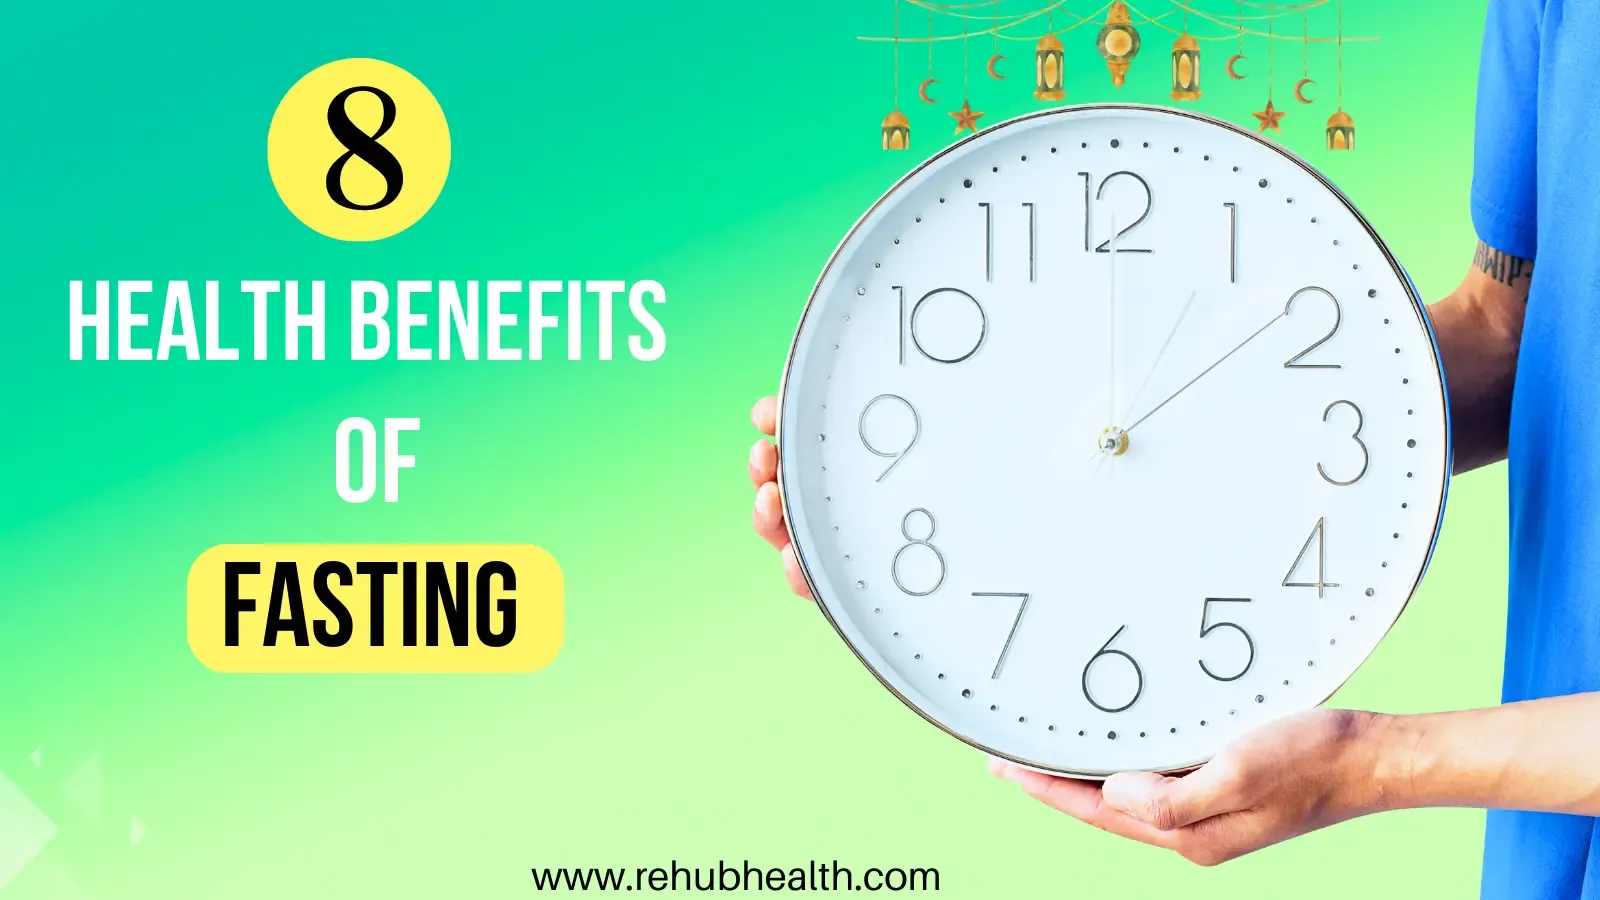 8 Health Benefits of Fasting